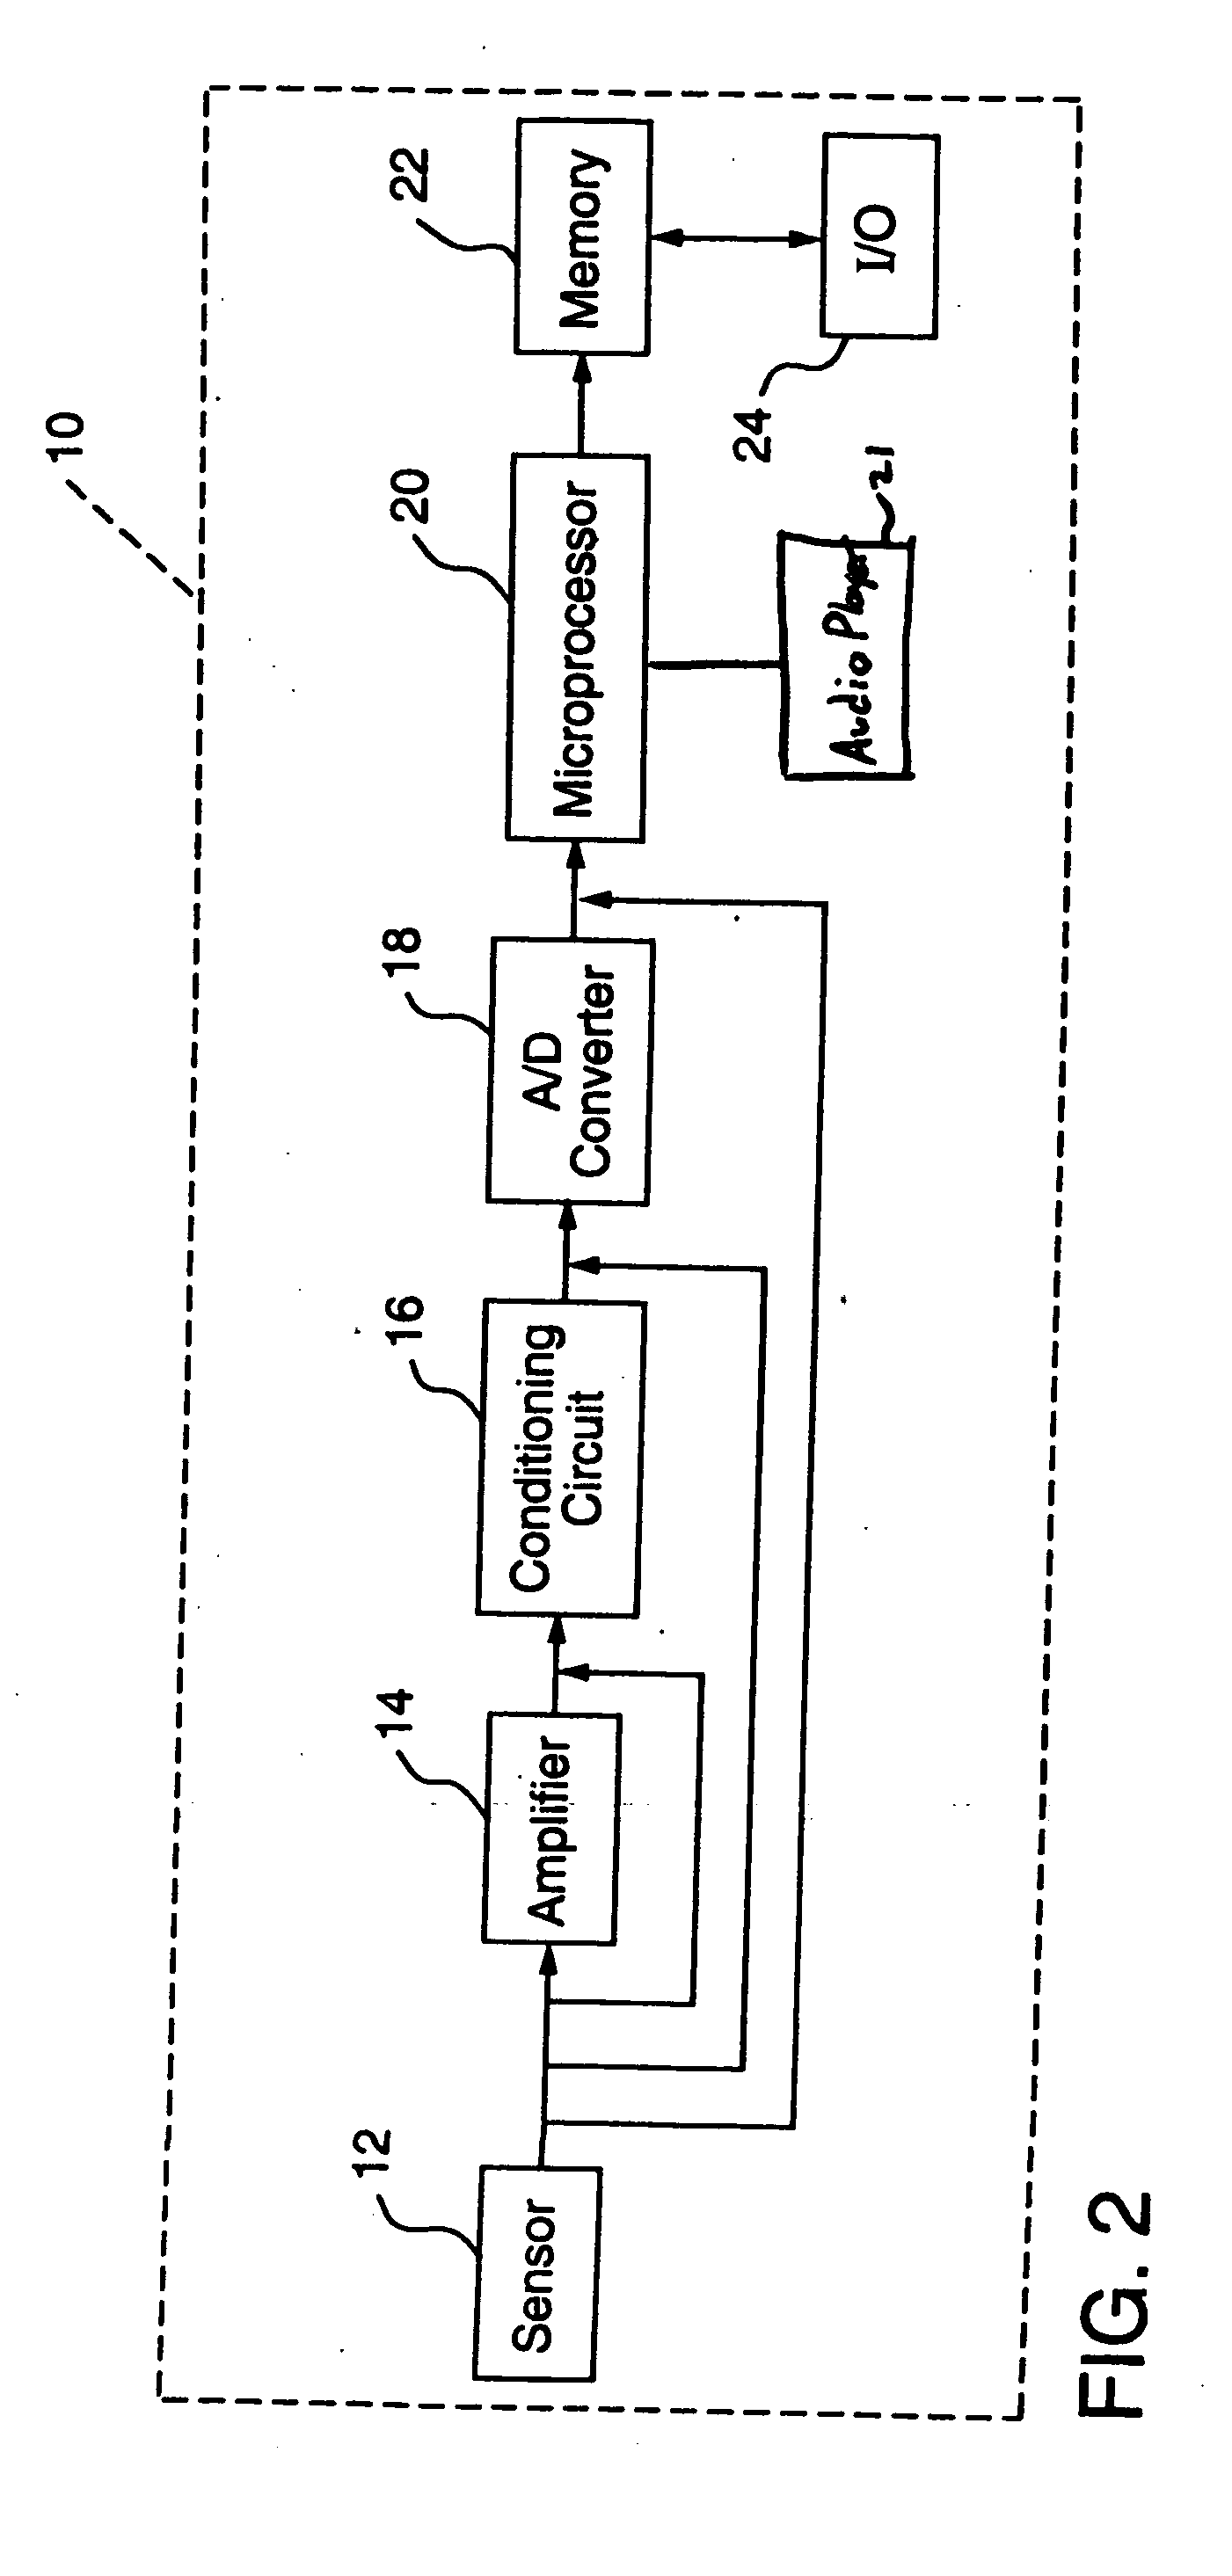 System for monitoring and managing body weight and other physiological conditions including iterative and personalized planning, intervention and reporting capability